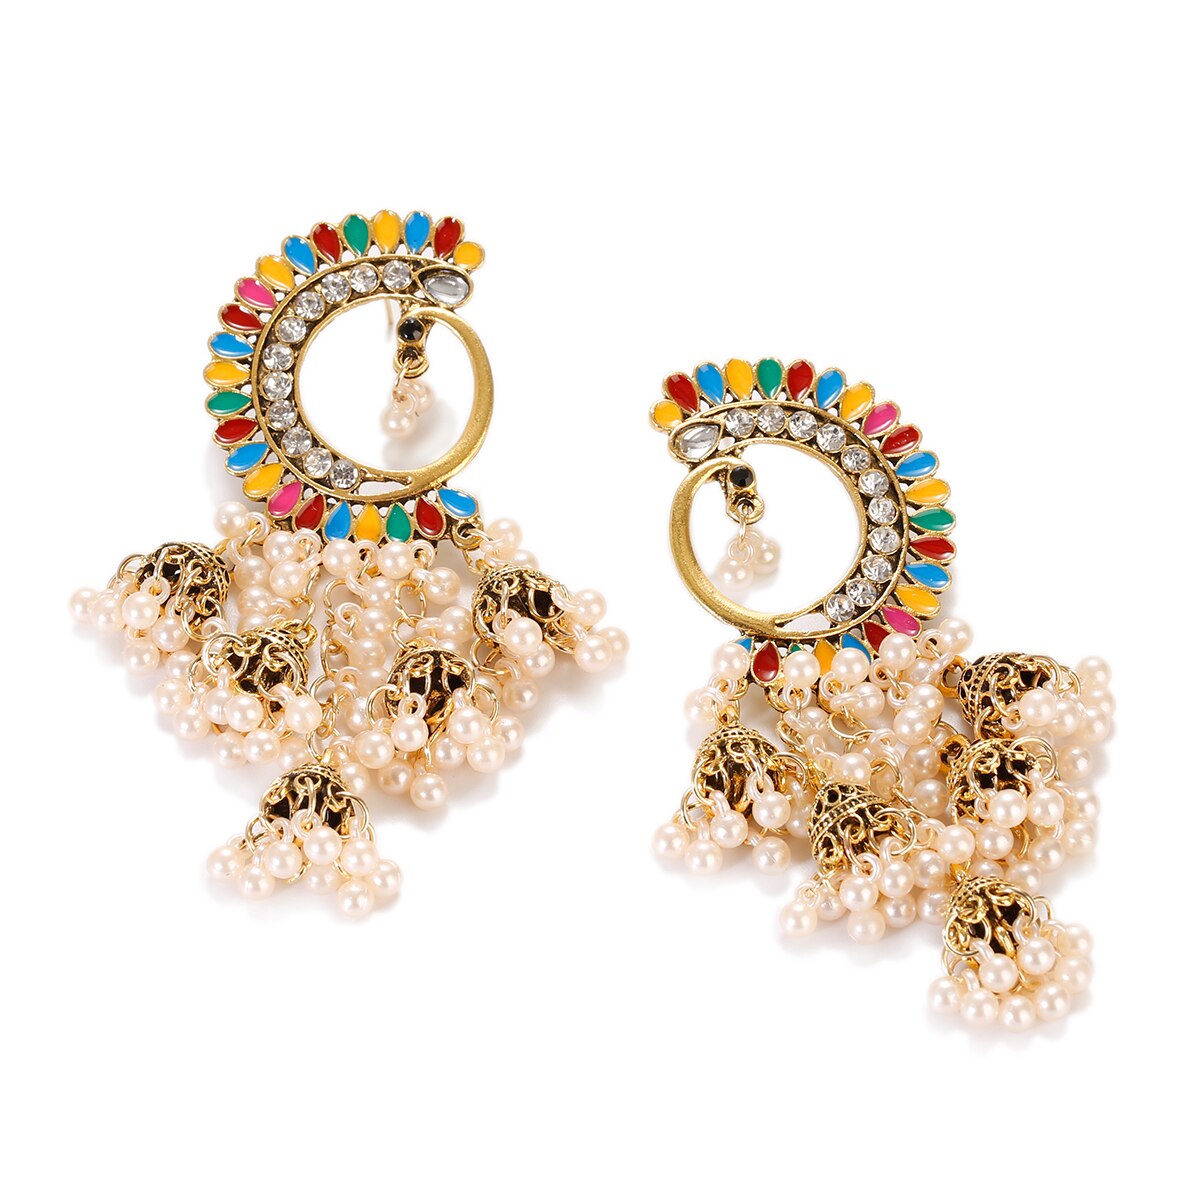 Afghan-Indian-Jewelry-Jhumka-Earrings-For-Women-Gypsy-Gold-Color-Dripping-Oil-Flower-Earrings-Fashio-1005003803870351-5